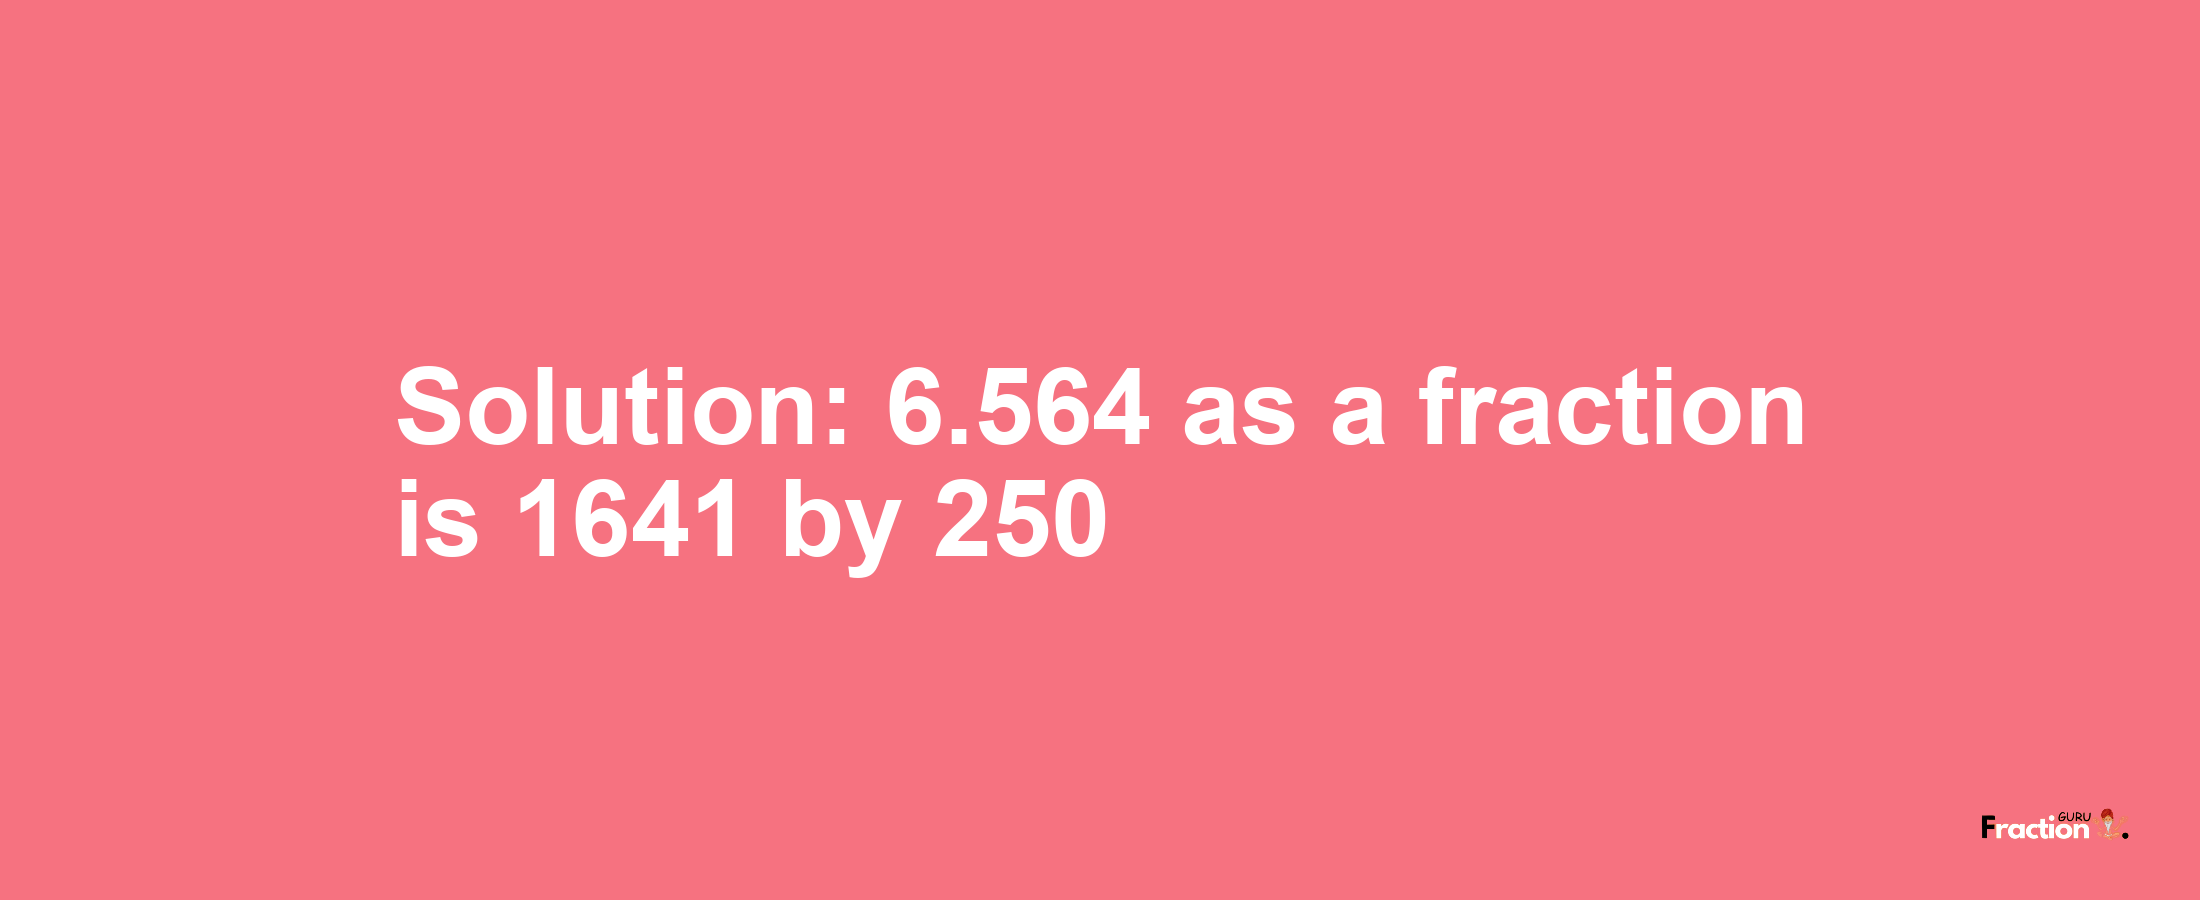 Solution:6.564 as a fraction is 1641/250